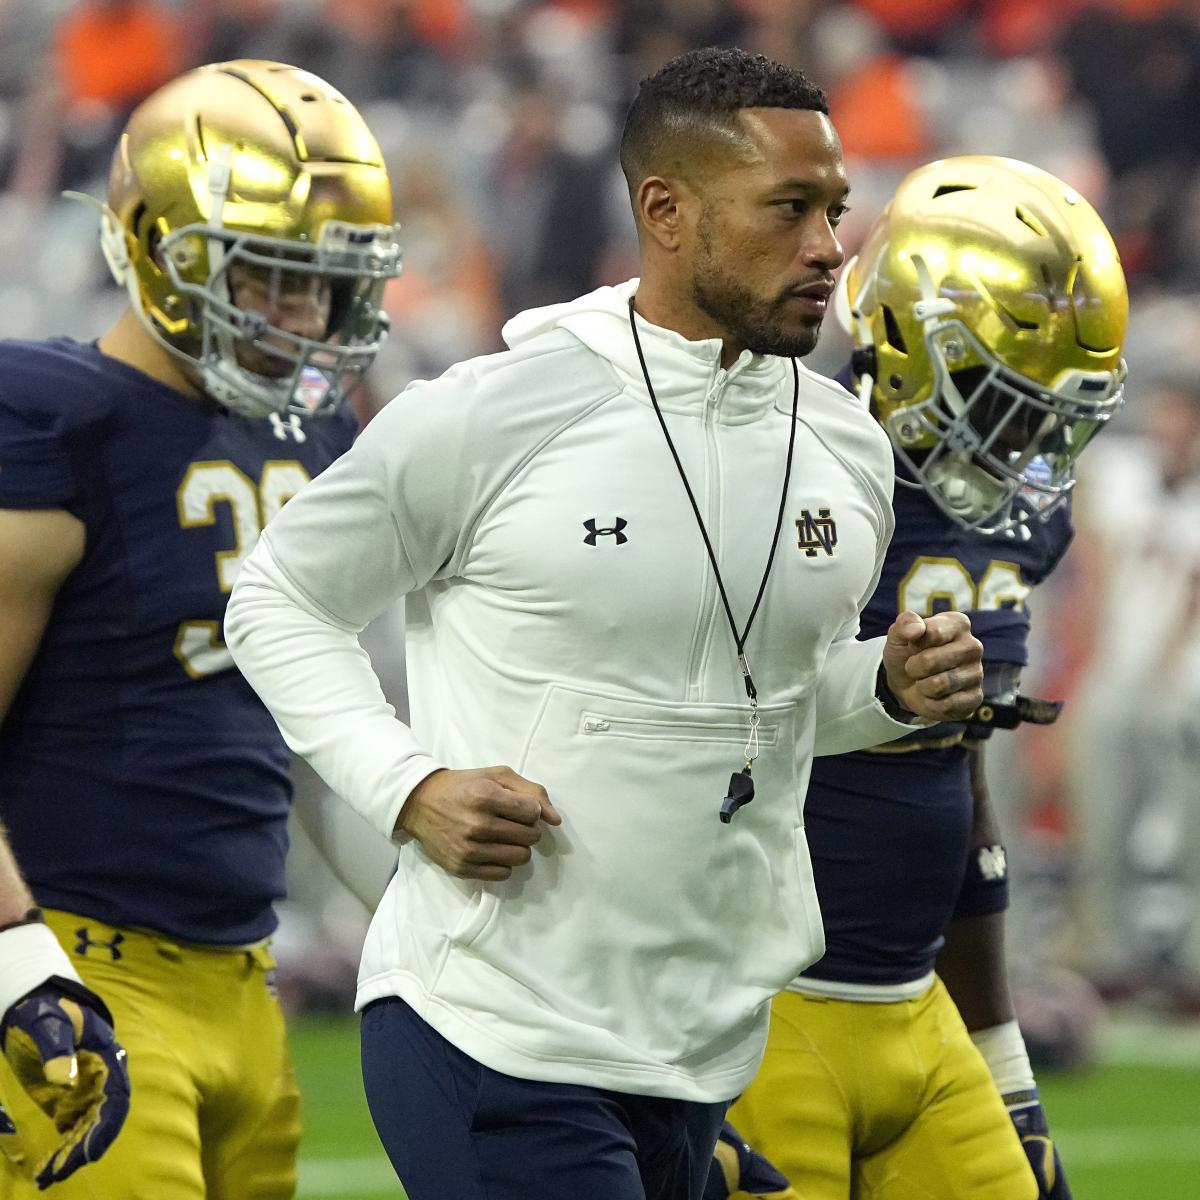 Notre Dame Spring Game 2022 Top Storylines and Prospects to Watch